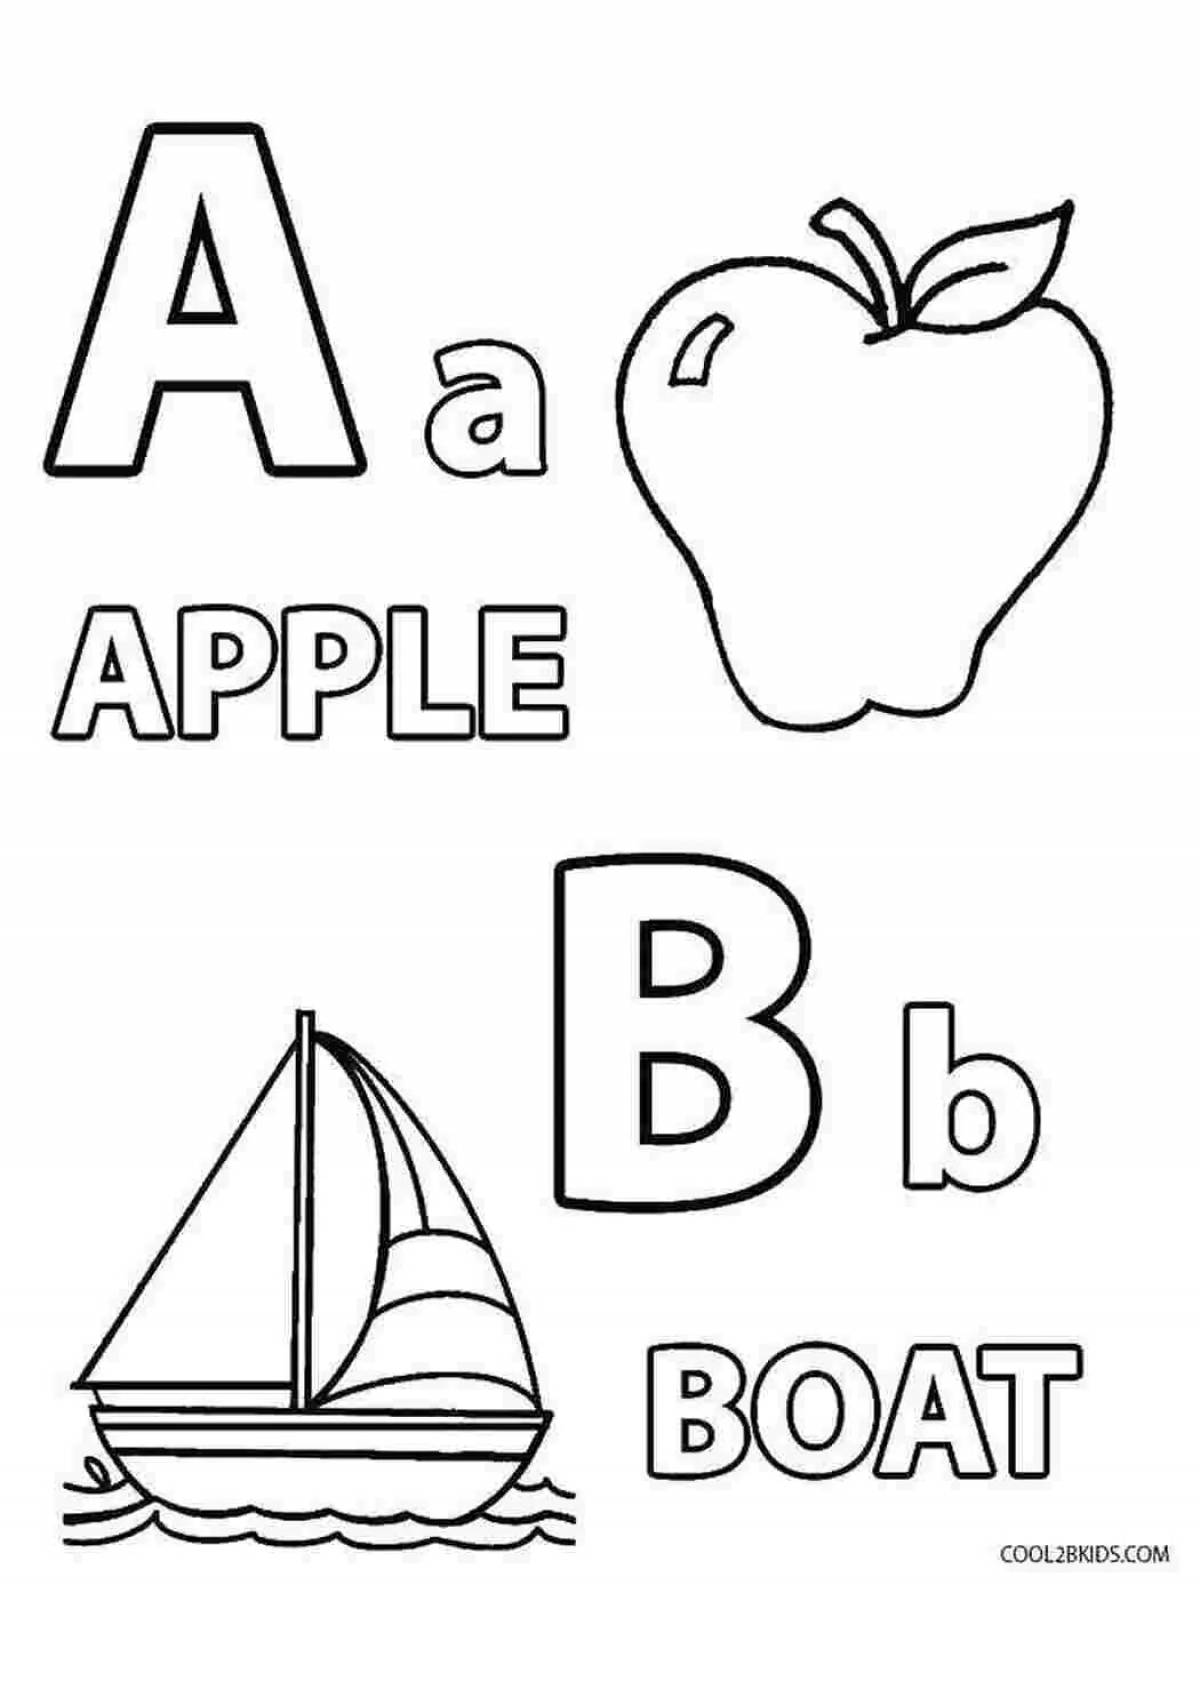 Amazing alphabet coloring page